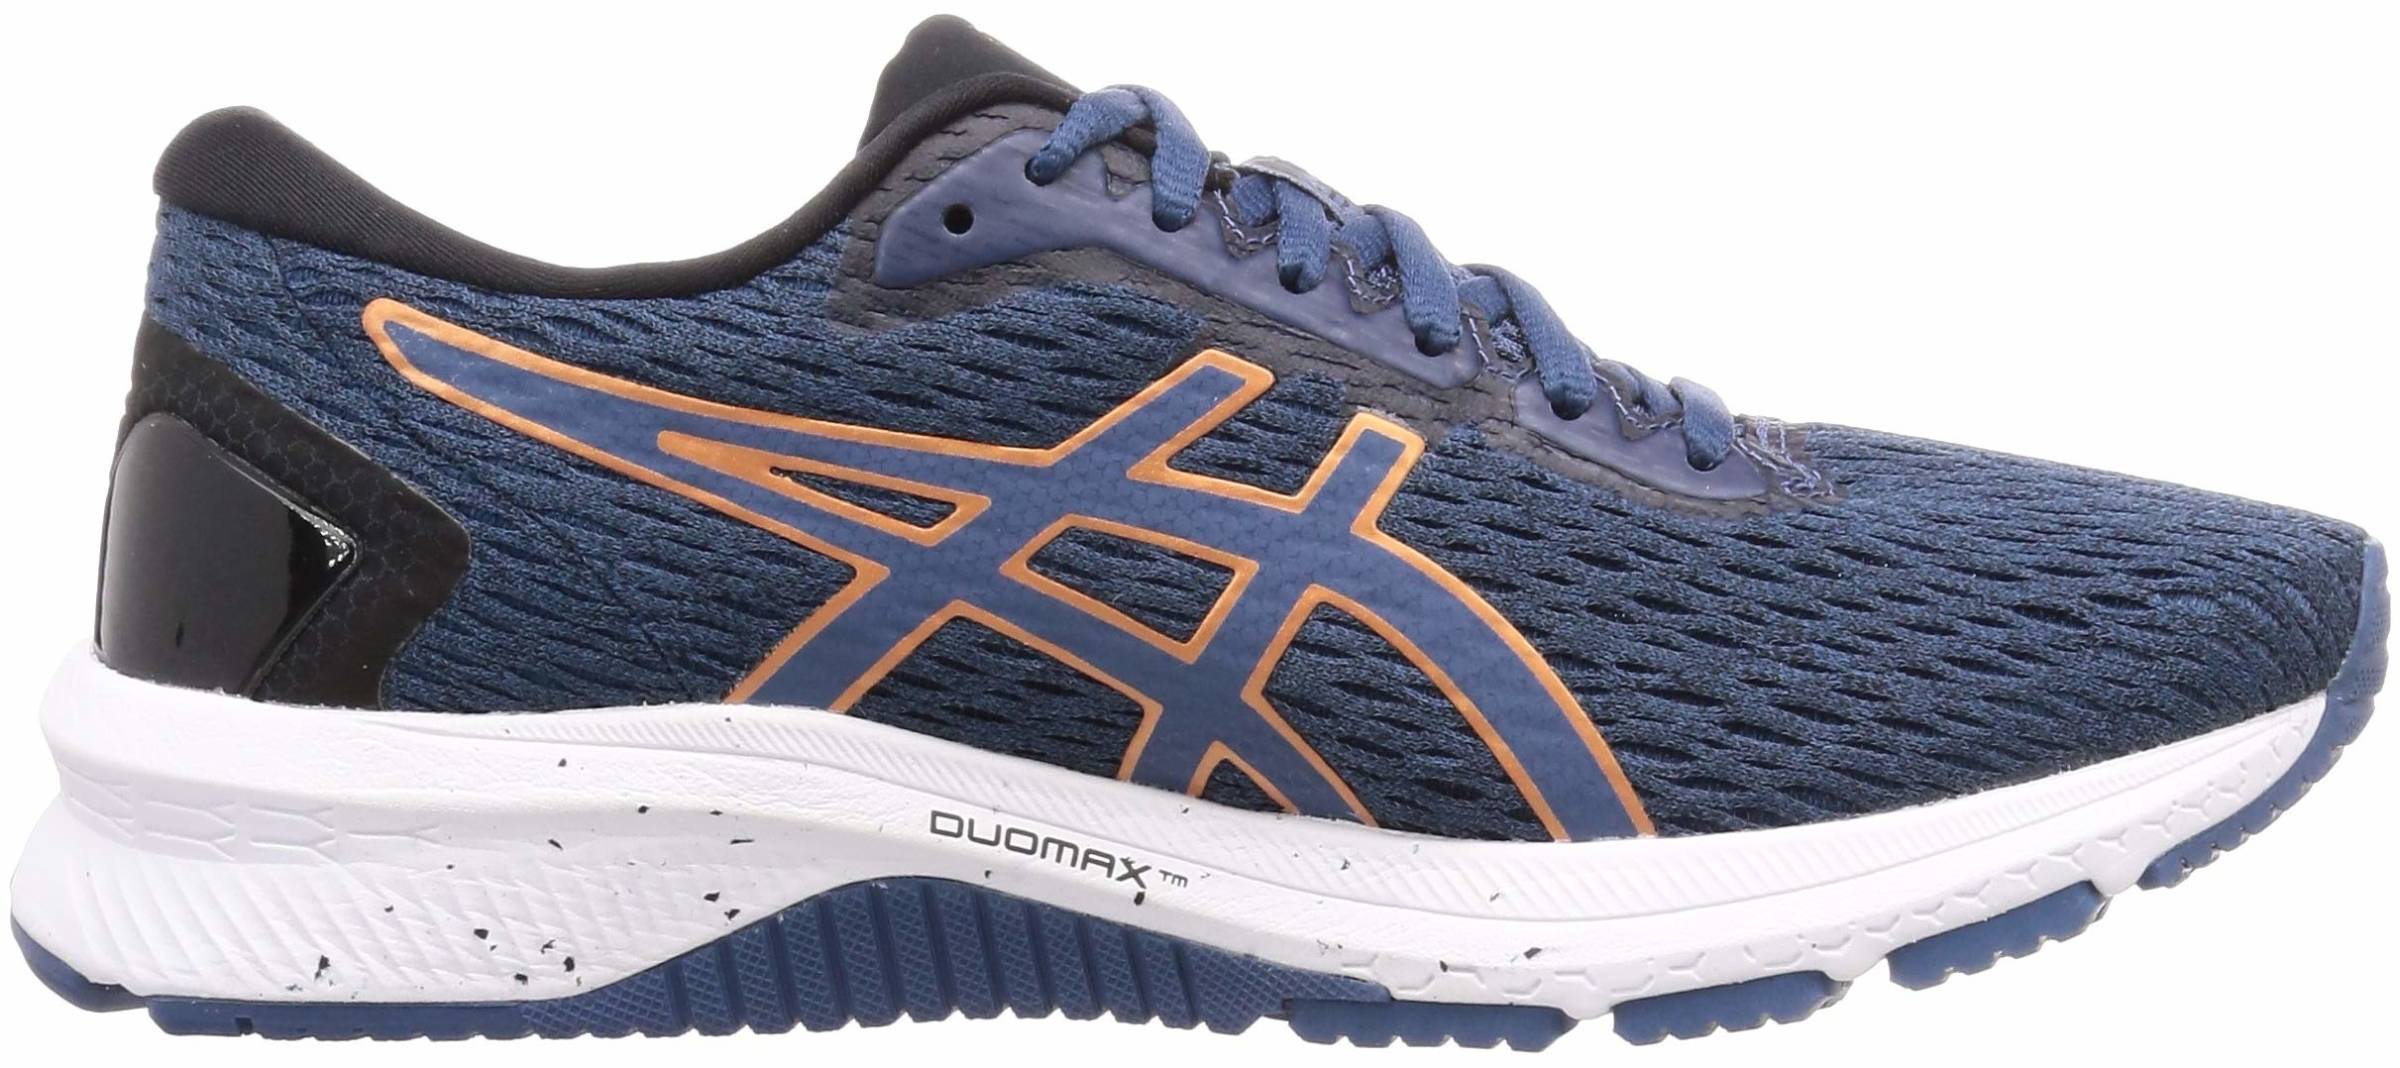 Asics Shoes Wide Fit Netherlands, SAVE 55% 